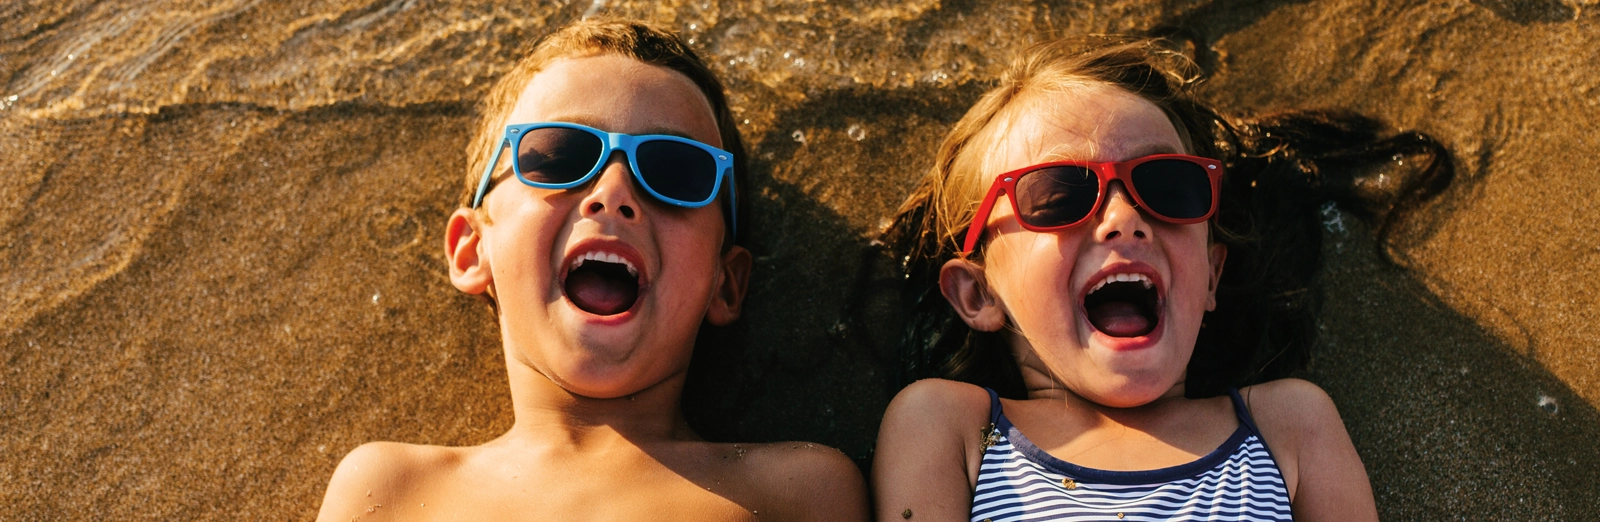 kids-in-sunglasses-laying-in-sand-1600x522.webp